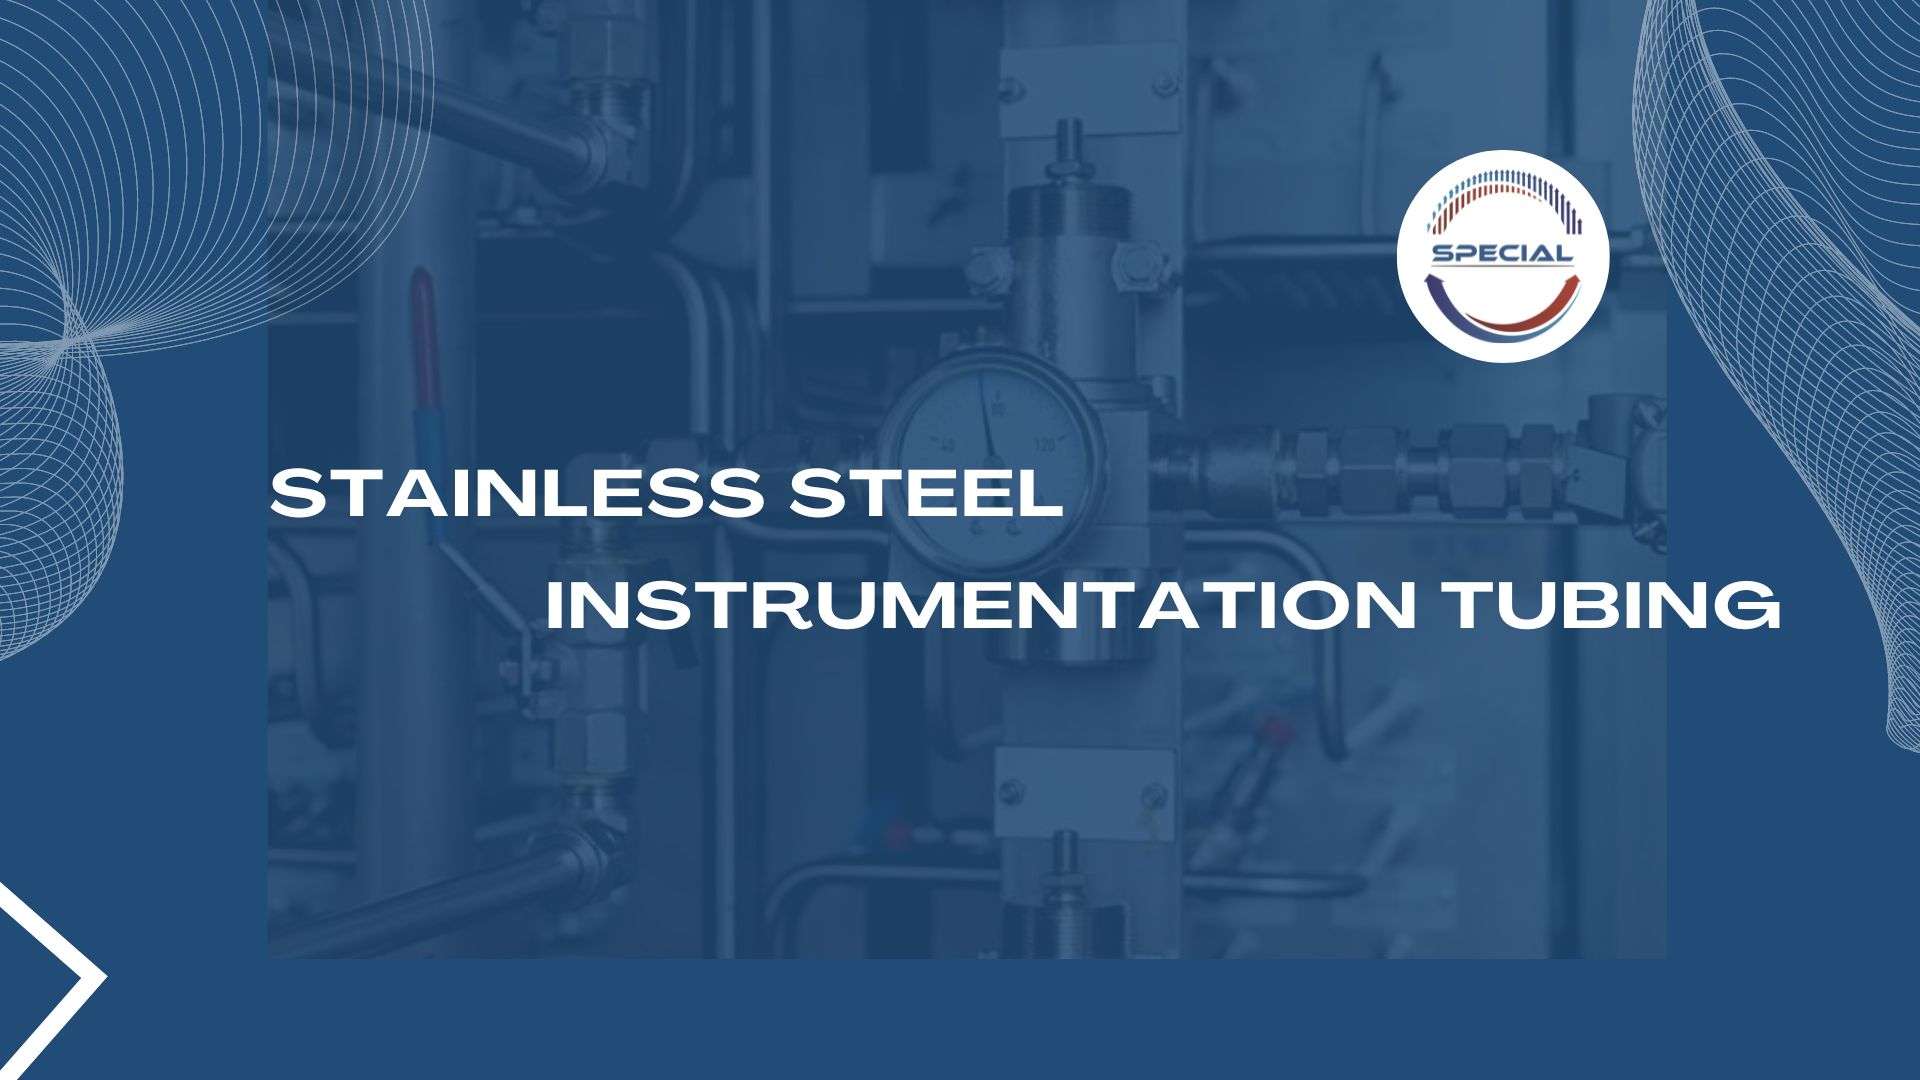 Special metals stainless steel Instrumentation tubing